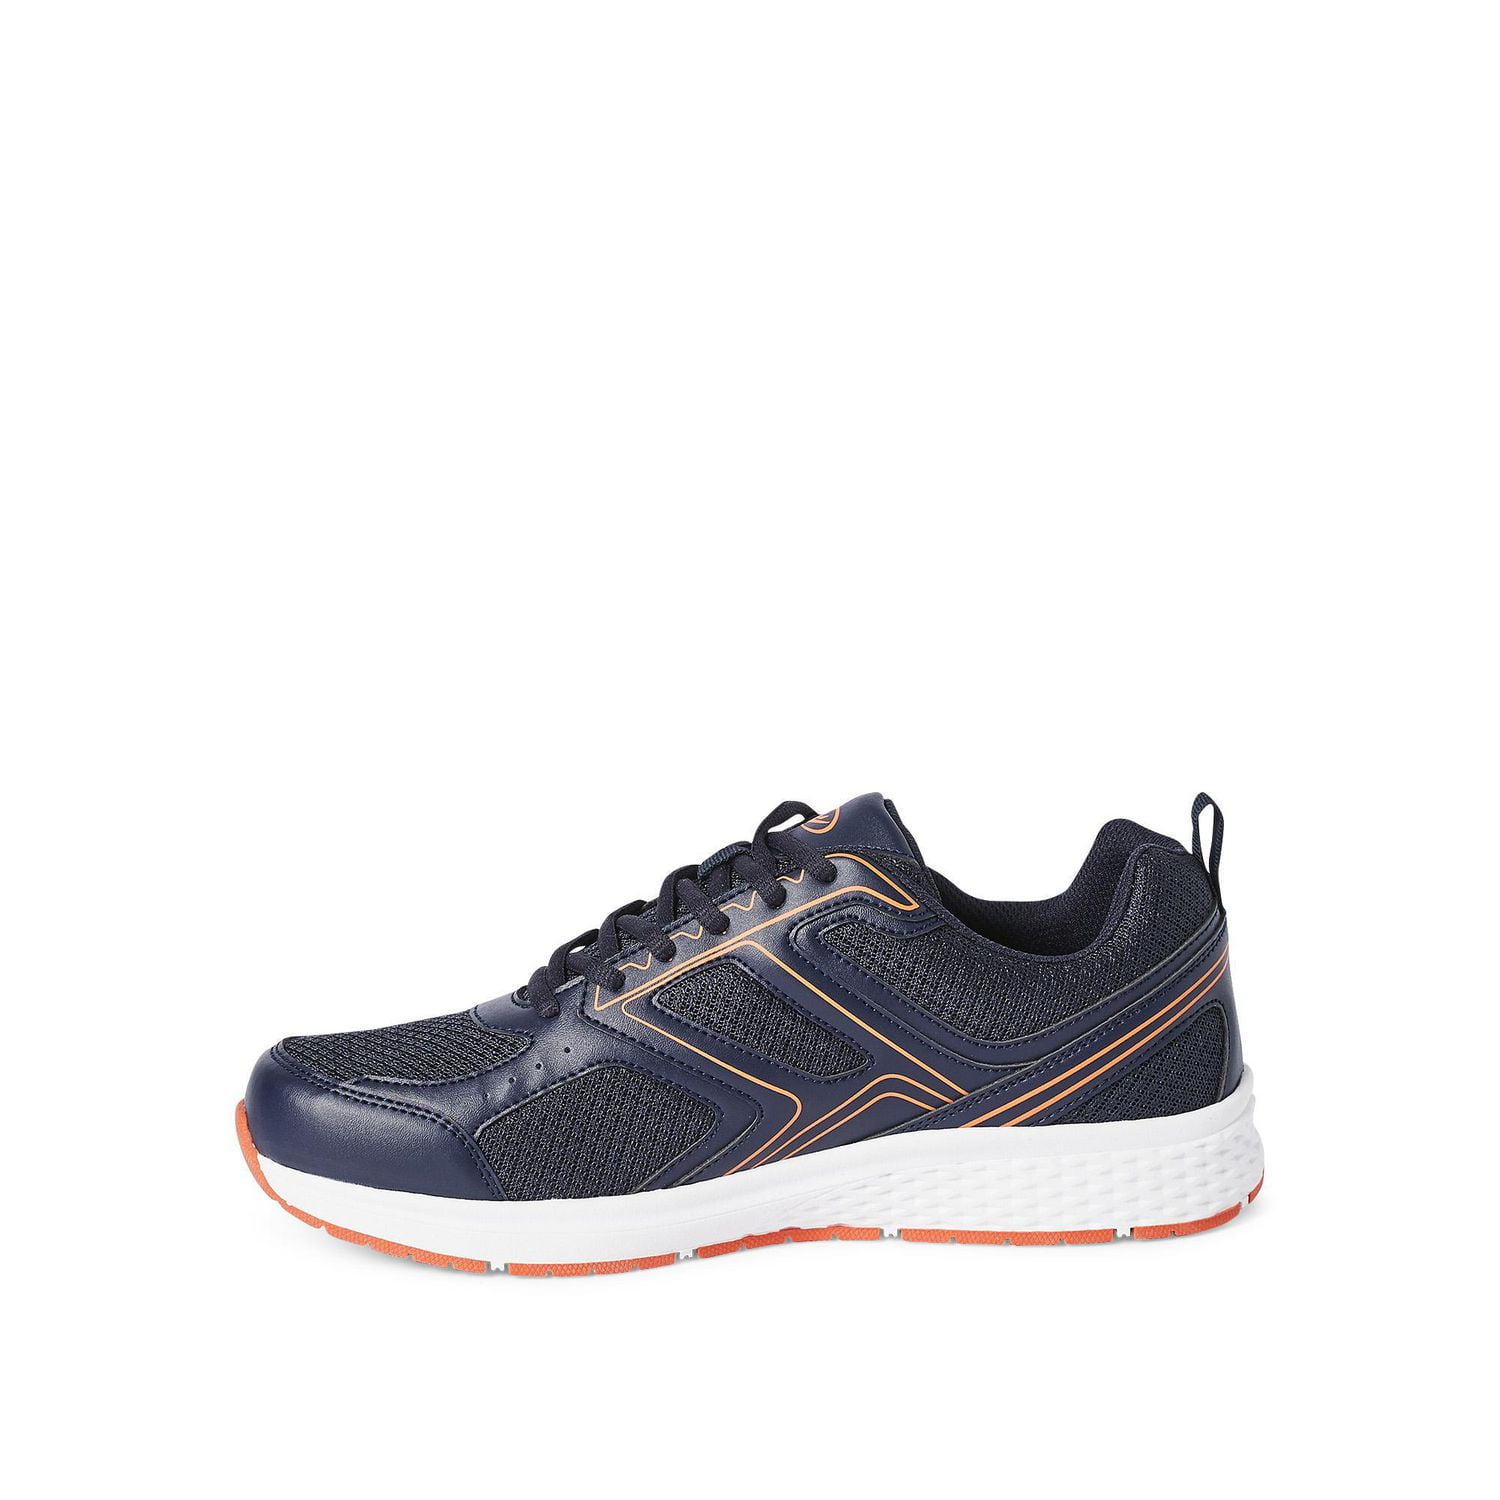 Athletic Works Men's Jet Sneakers, Sizes 7-13